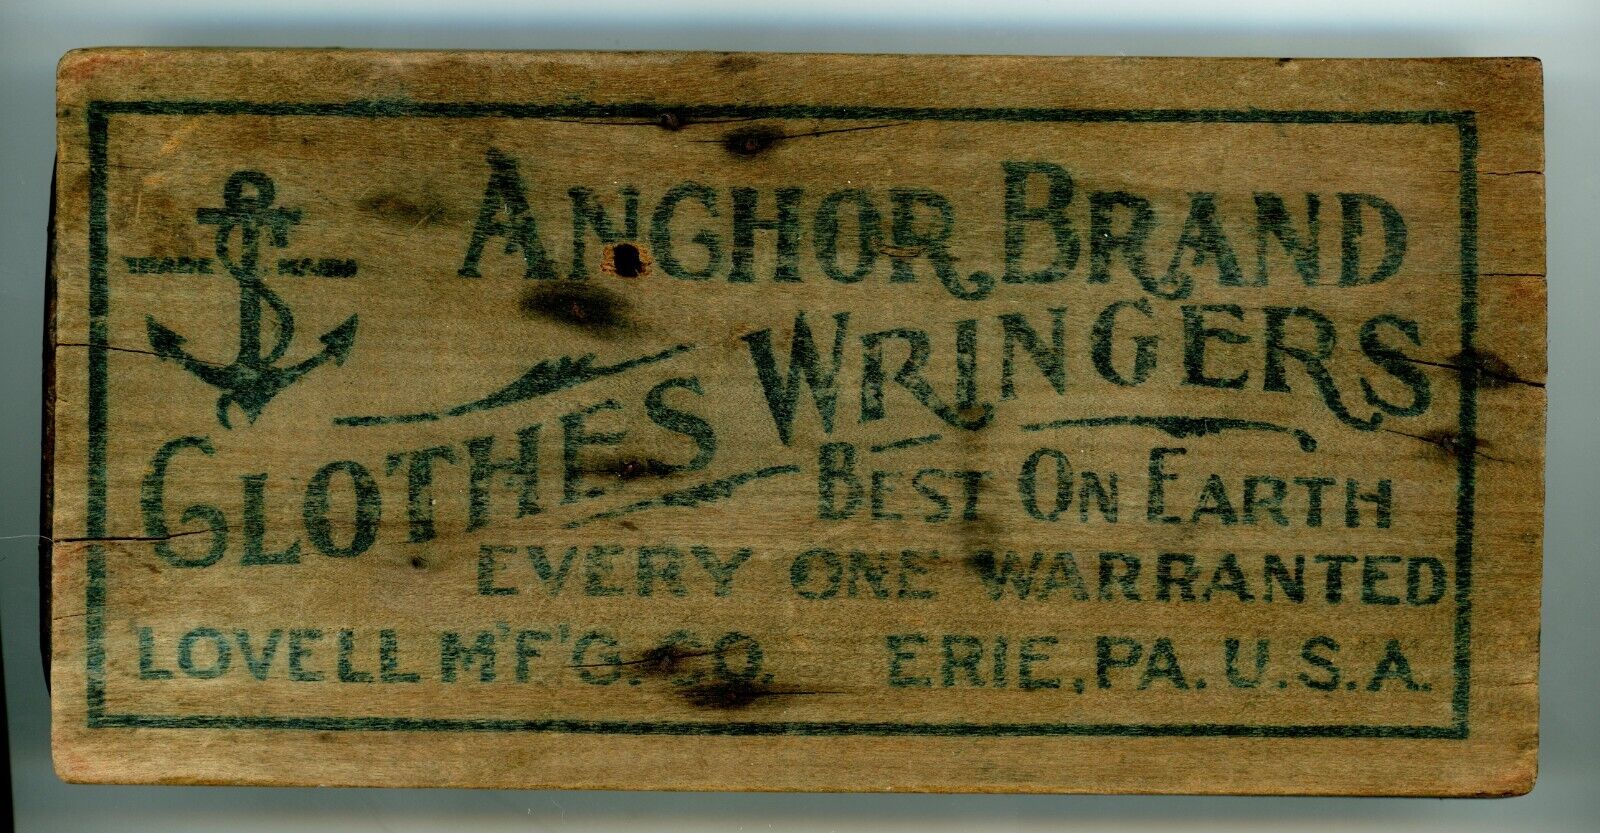 Early 1900s Unusual Anchor Brand Clothes Wringers, Erie, Pa., Wooden Rat Trap